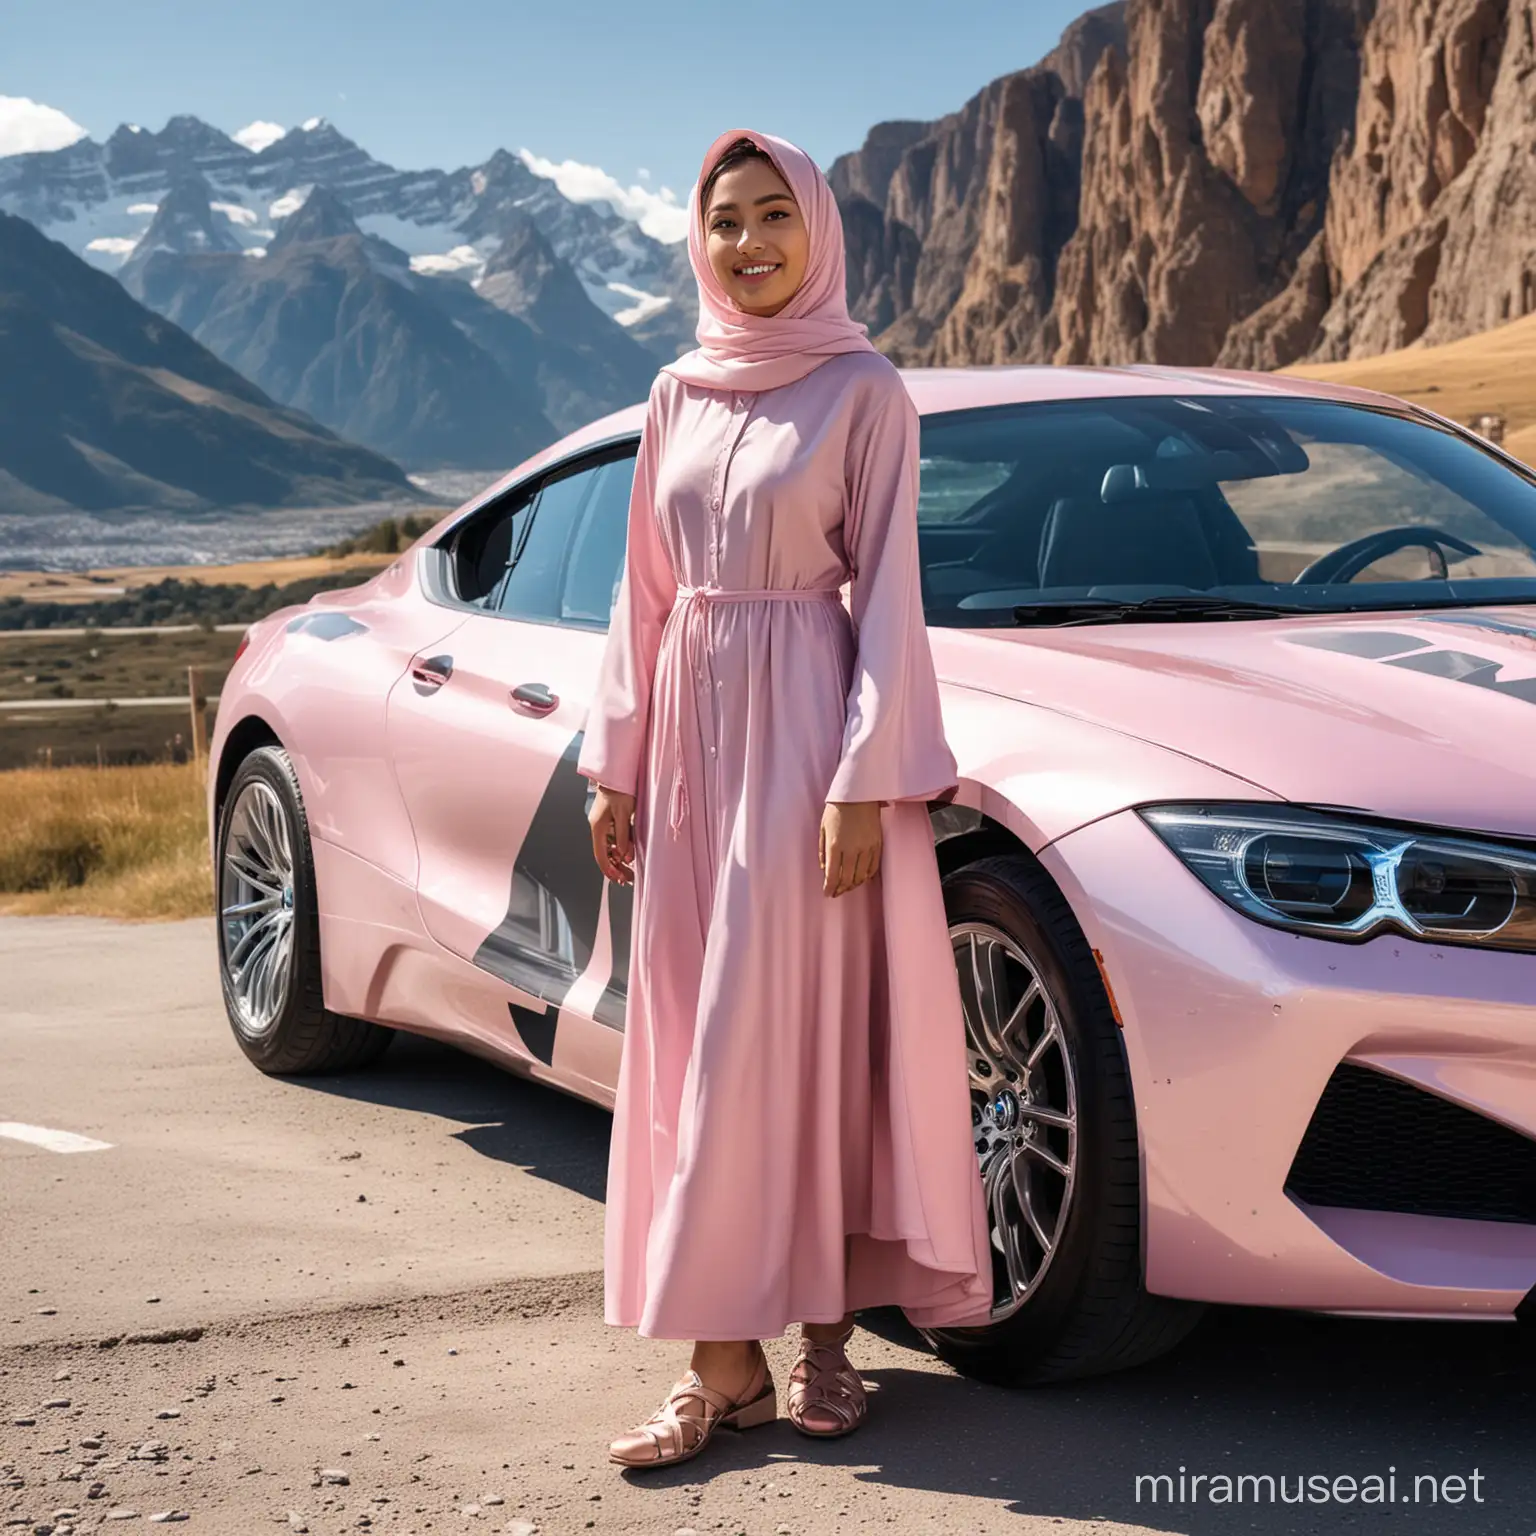 an asian girl next to the door of a pink bmw sport sport car, with an aerodynamic design, smiled faintly, wearing a hijab, abaya dress, long loose skirt maron shoes. In the background there are beautiful mountains under a bright blue sky. Mountains have different patterns, showing different distances and heights. The lighting is natural and bright, highlighting the shiny surfaces of the car and creating reflections on them.